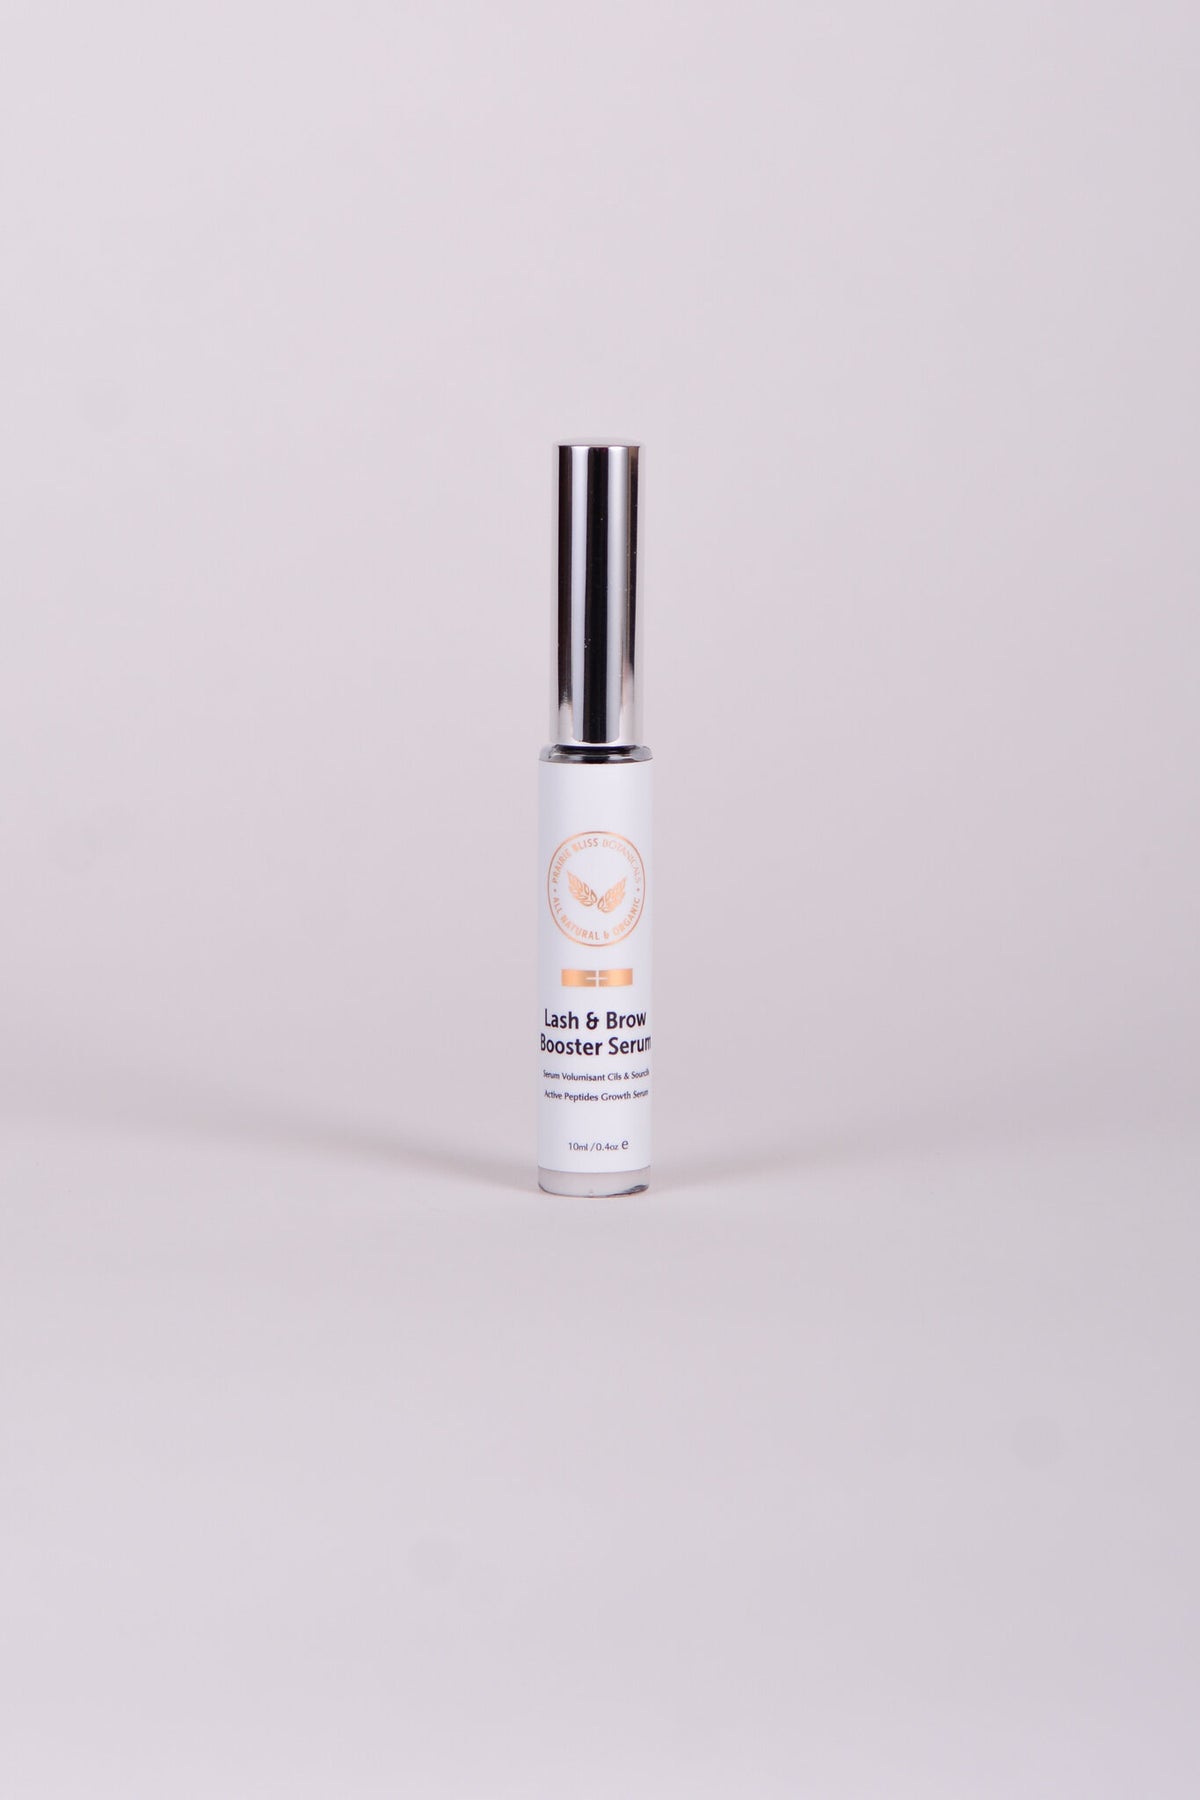 Lash and Brow Booster Serum